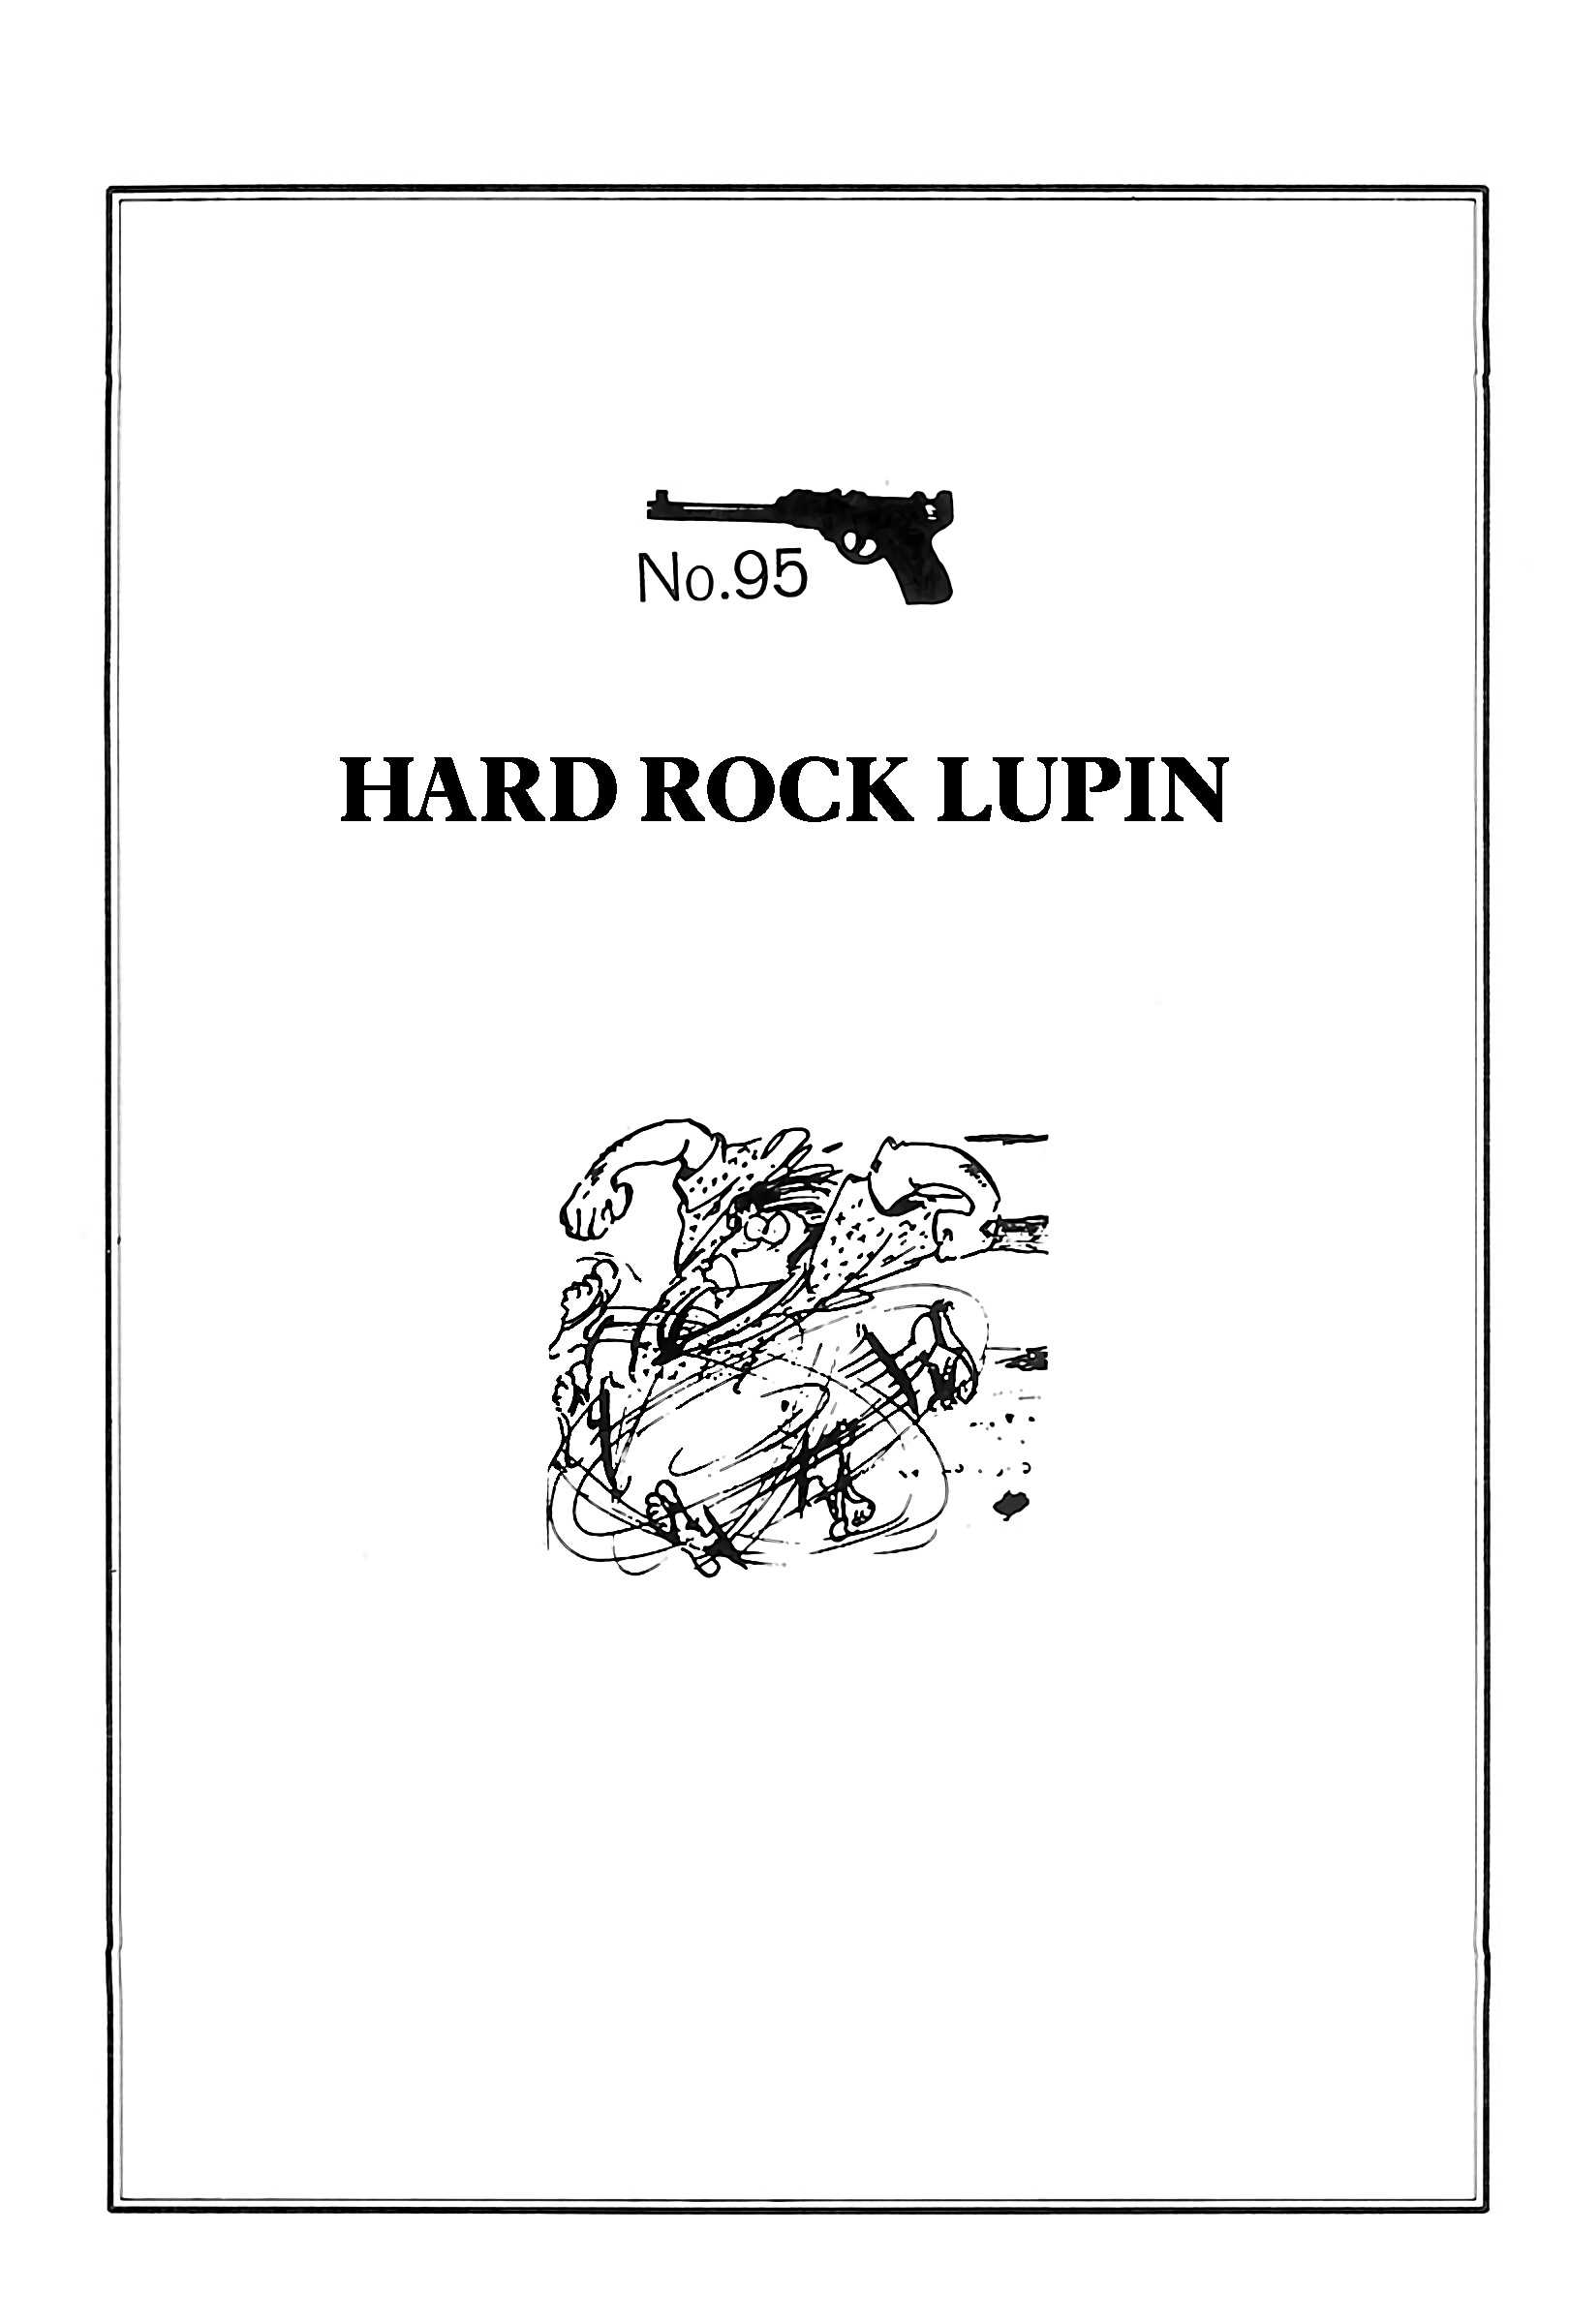 Lupin Iii: World’S Most Wanted Vol.9 Chapter 95: Hard Rock Lupin - Picture 1